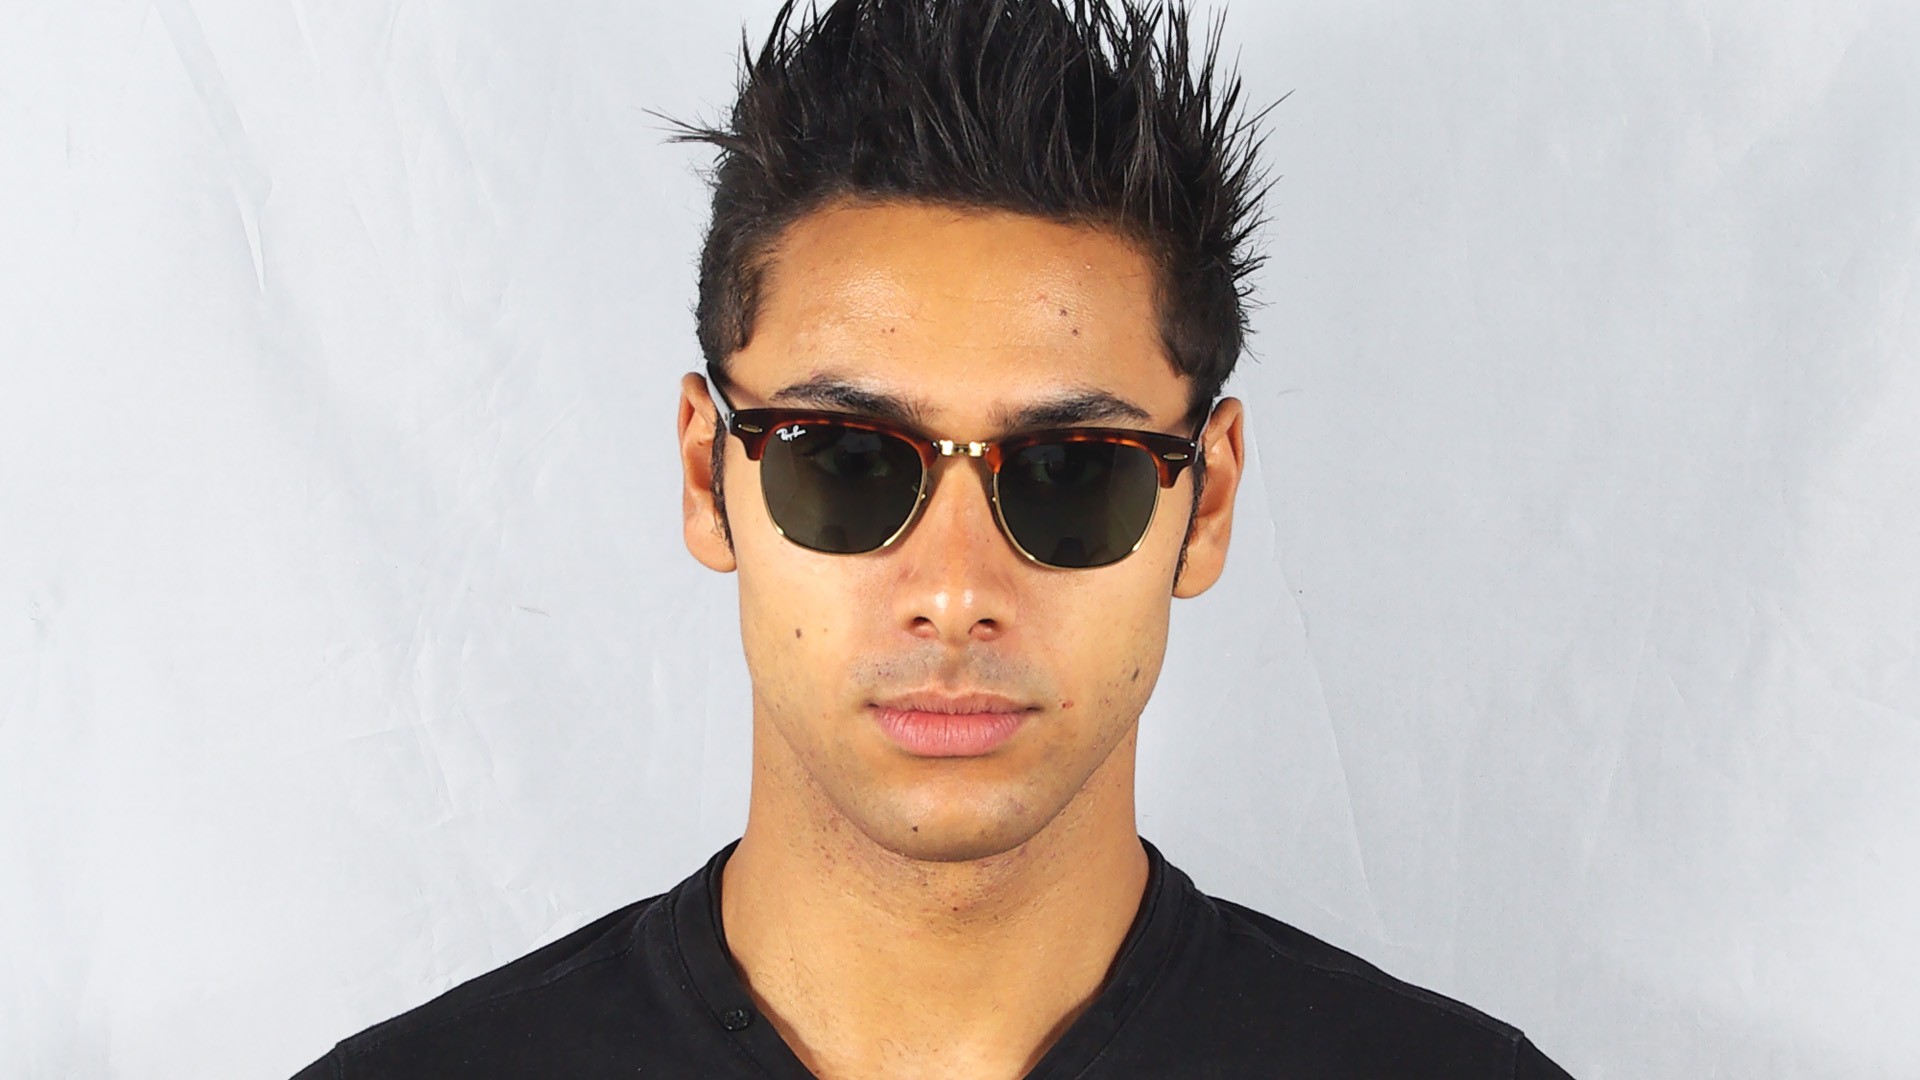 ray ban clubmaster wo366